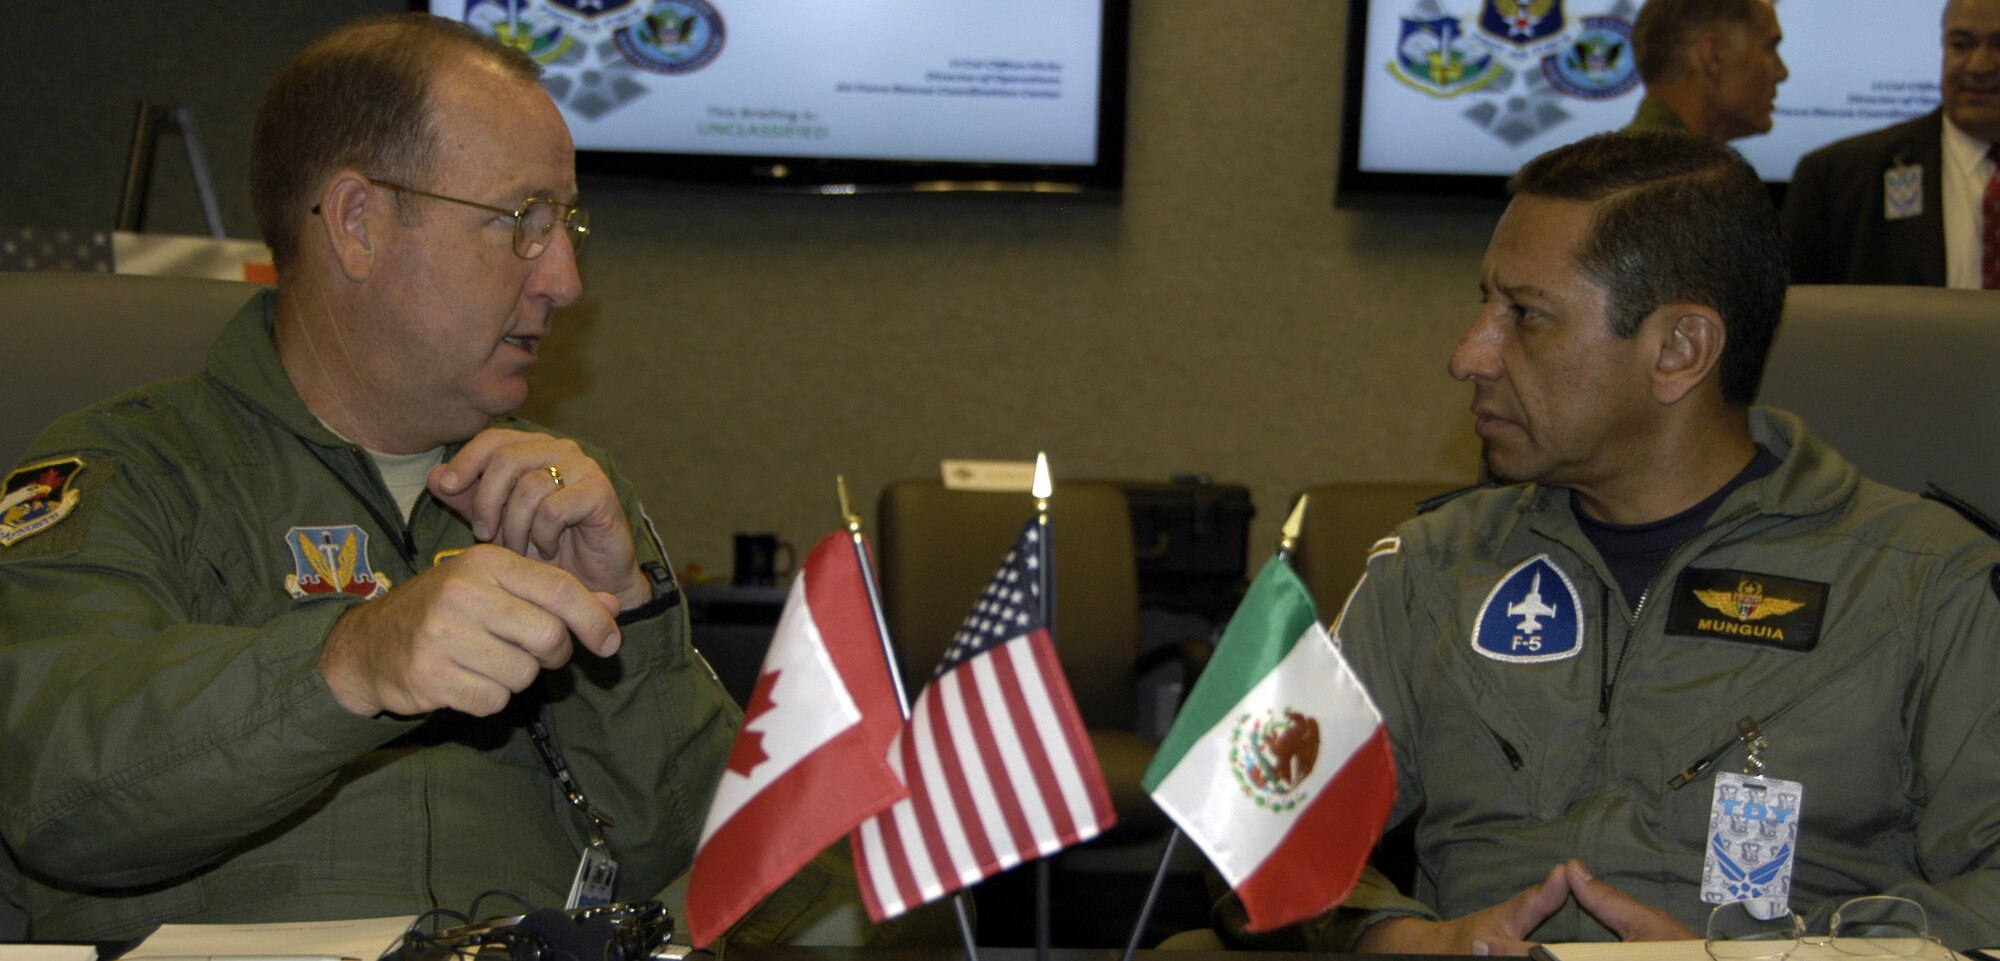 First Air Force commander Maj. Gen. Hank Morrow (left) discusses North
American homeland operations with Maj. Gen. Carlos Antonio Rodriguez
Munguia, deputy director of operations for the Mexican Air Force.
